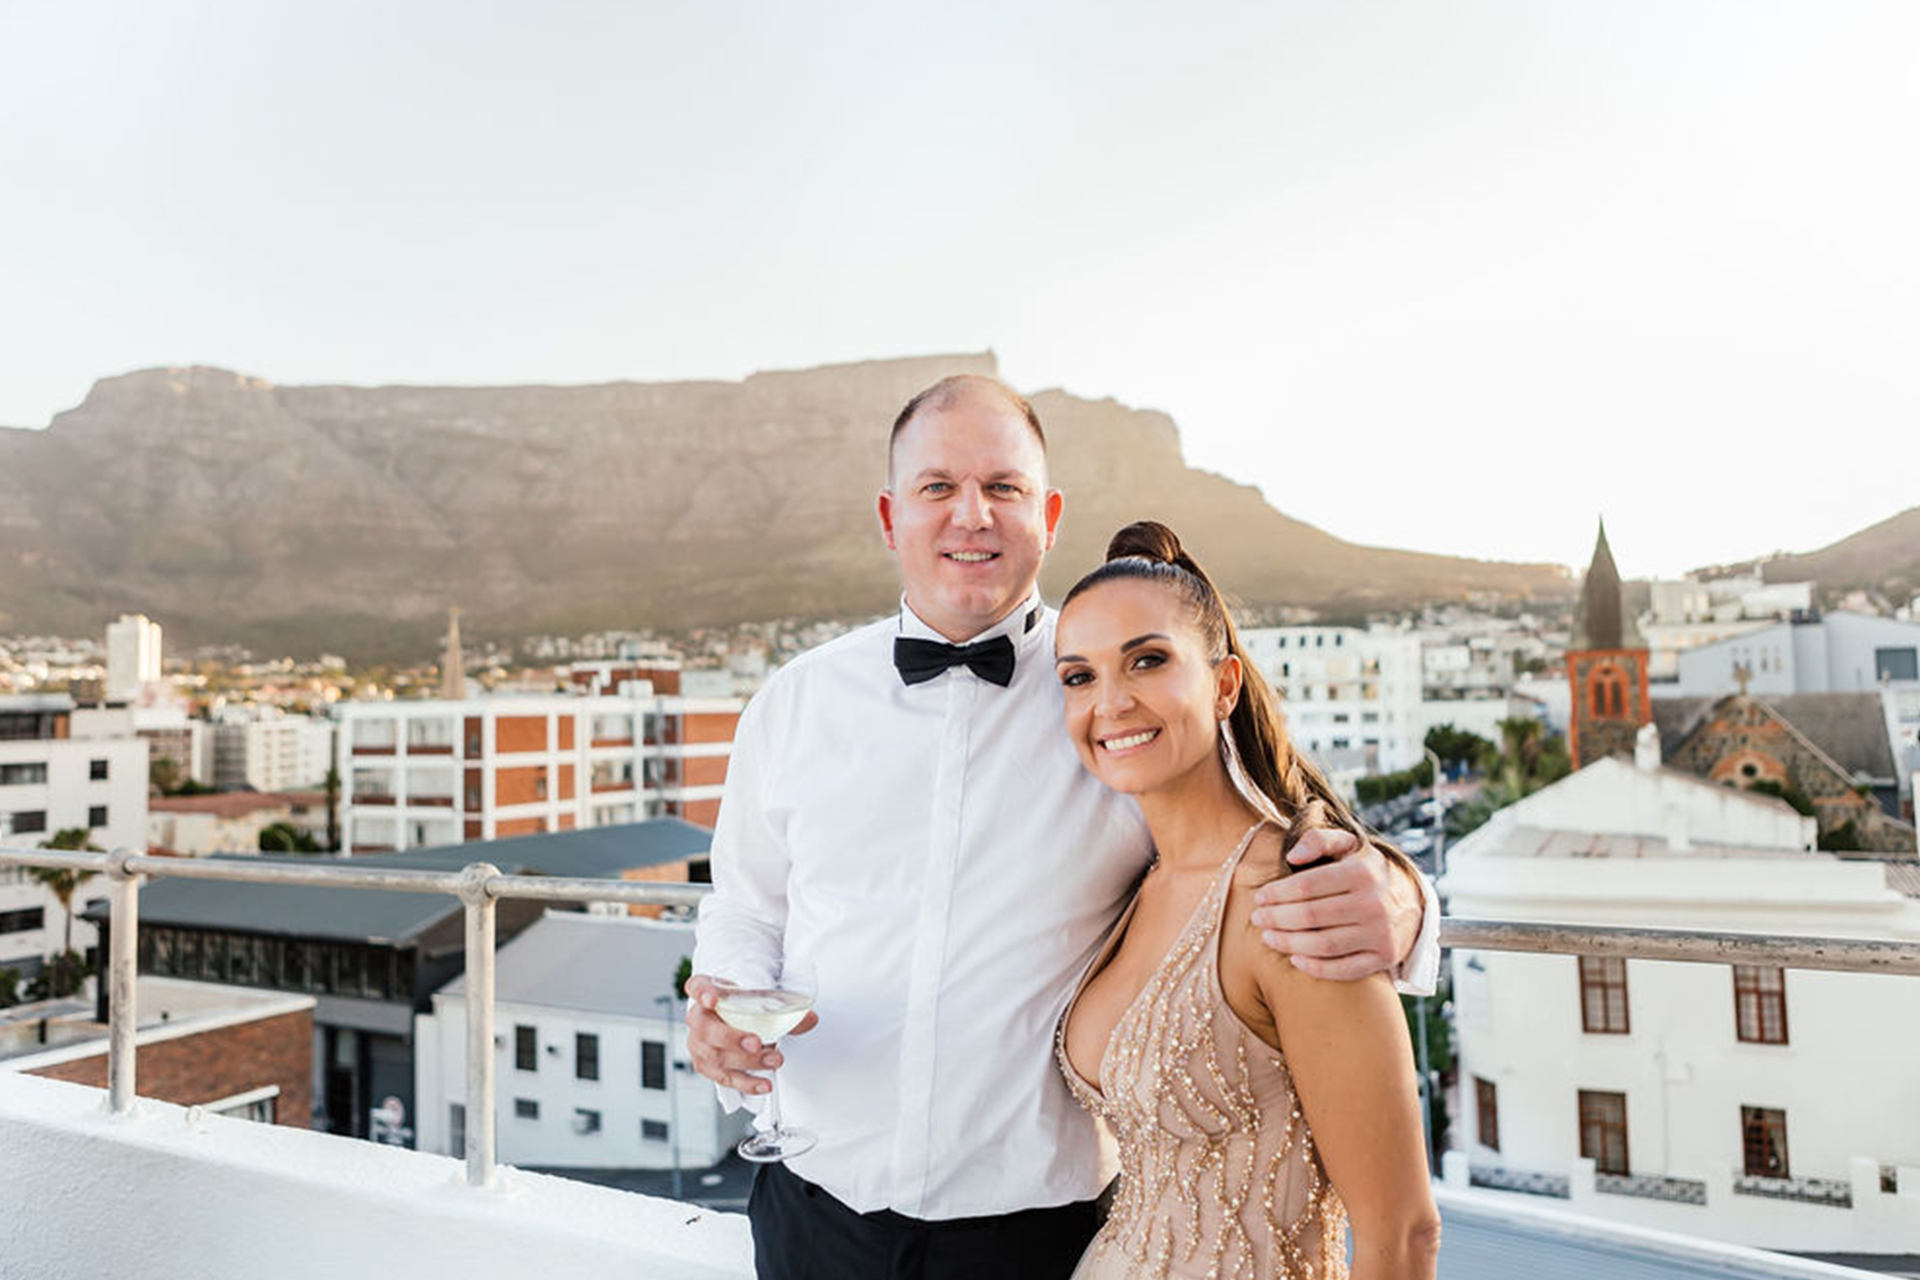 Husband and wife standing on a rooftop with cityscape in the background